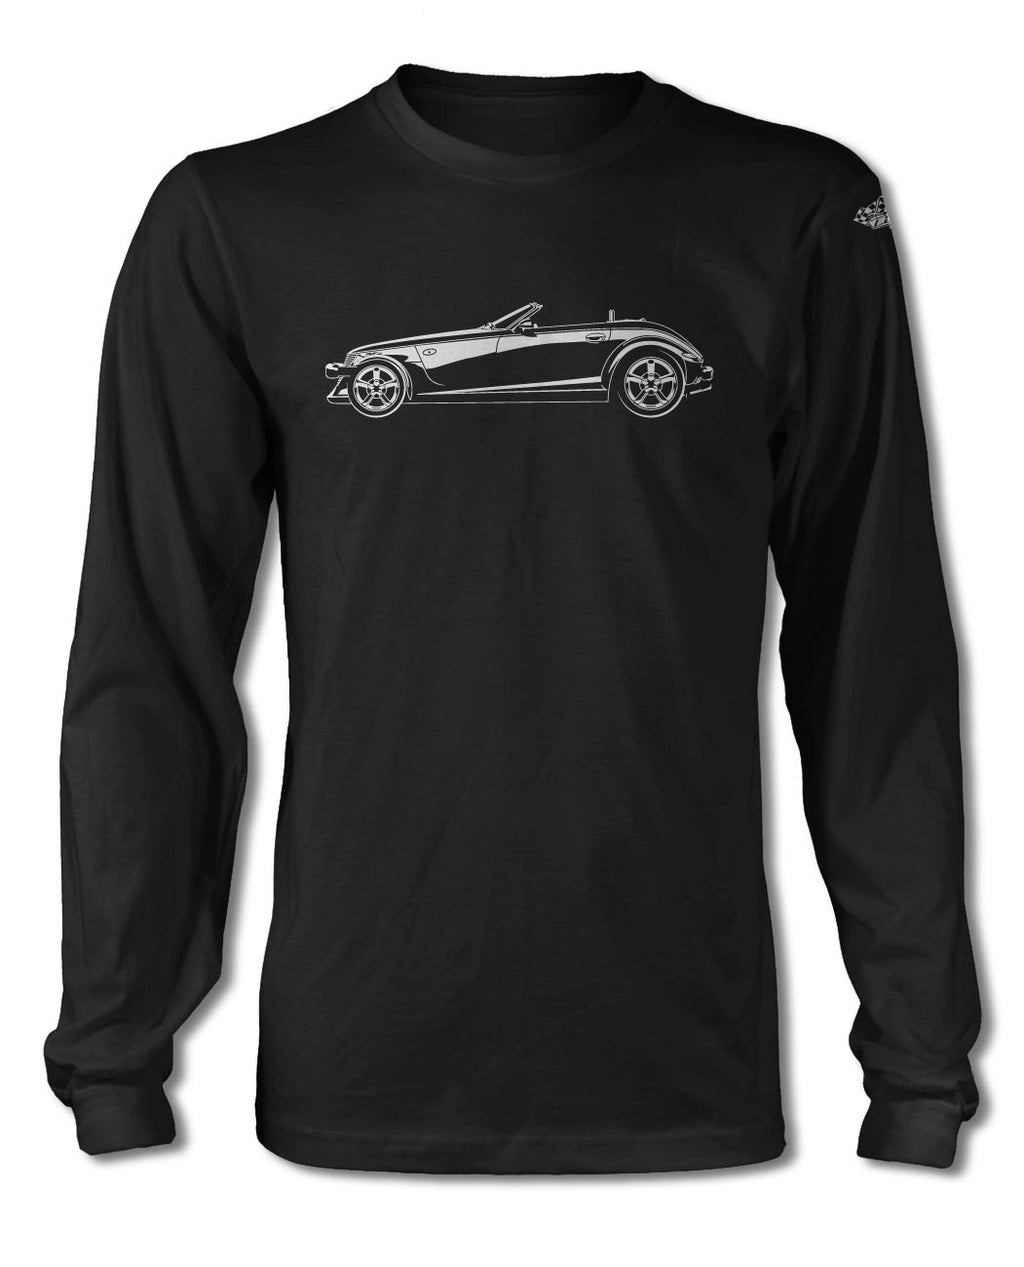 1997 - 2002 Plymouth Prowler T-Shirt - Long Sleeves - Side View